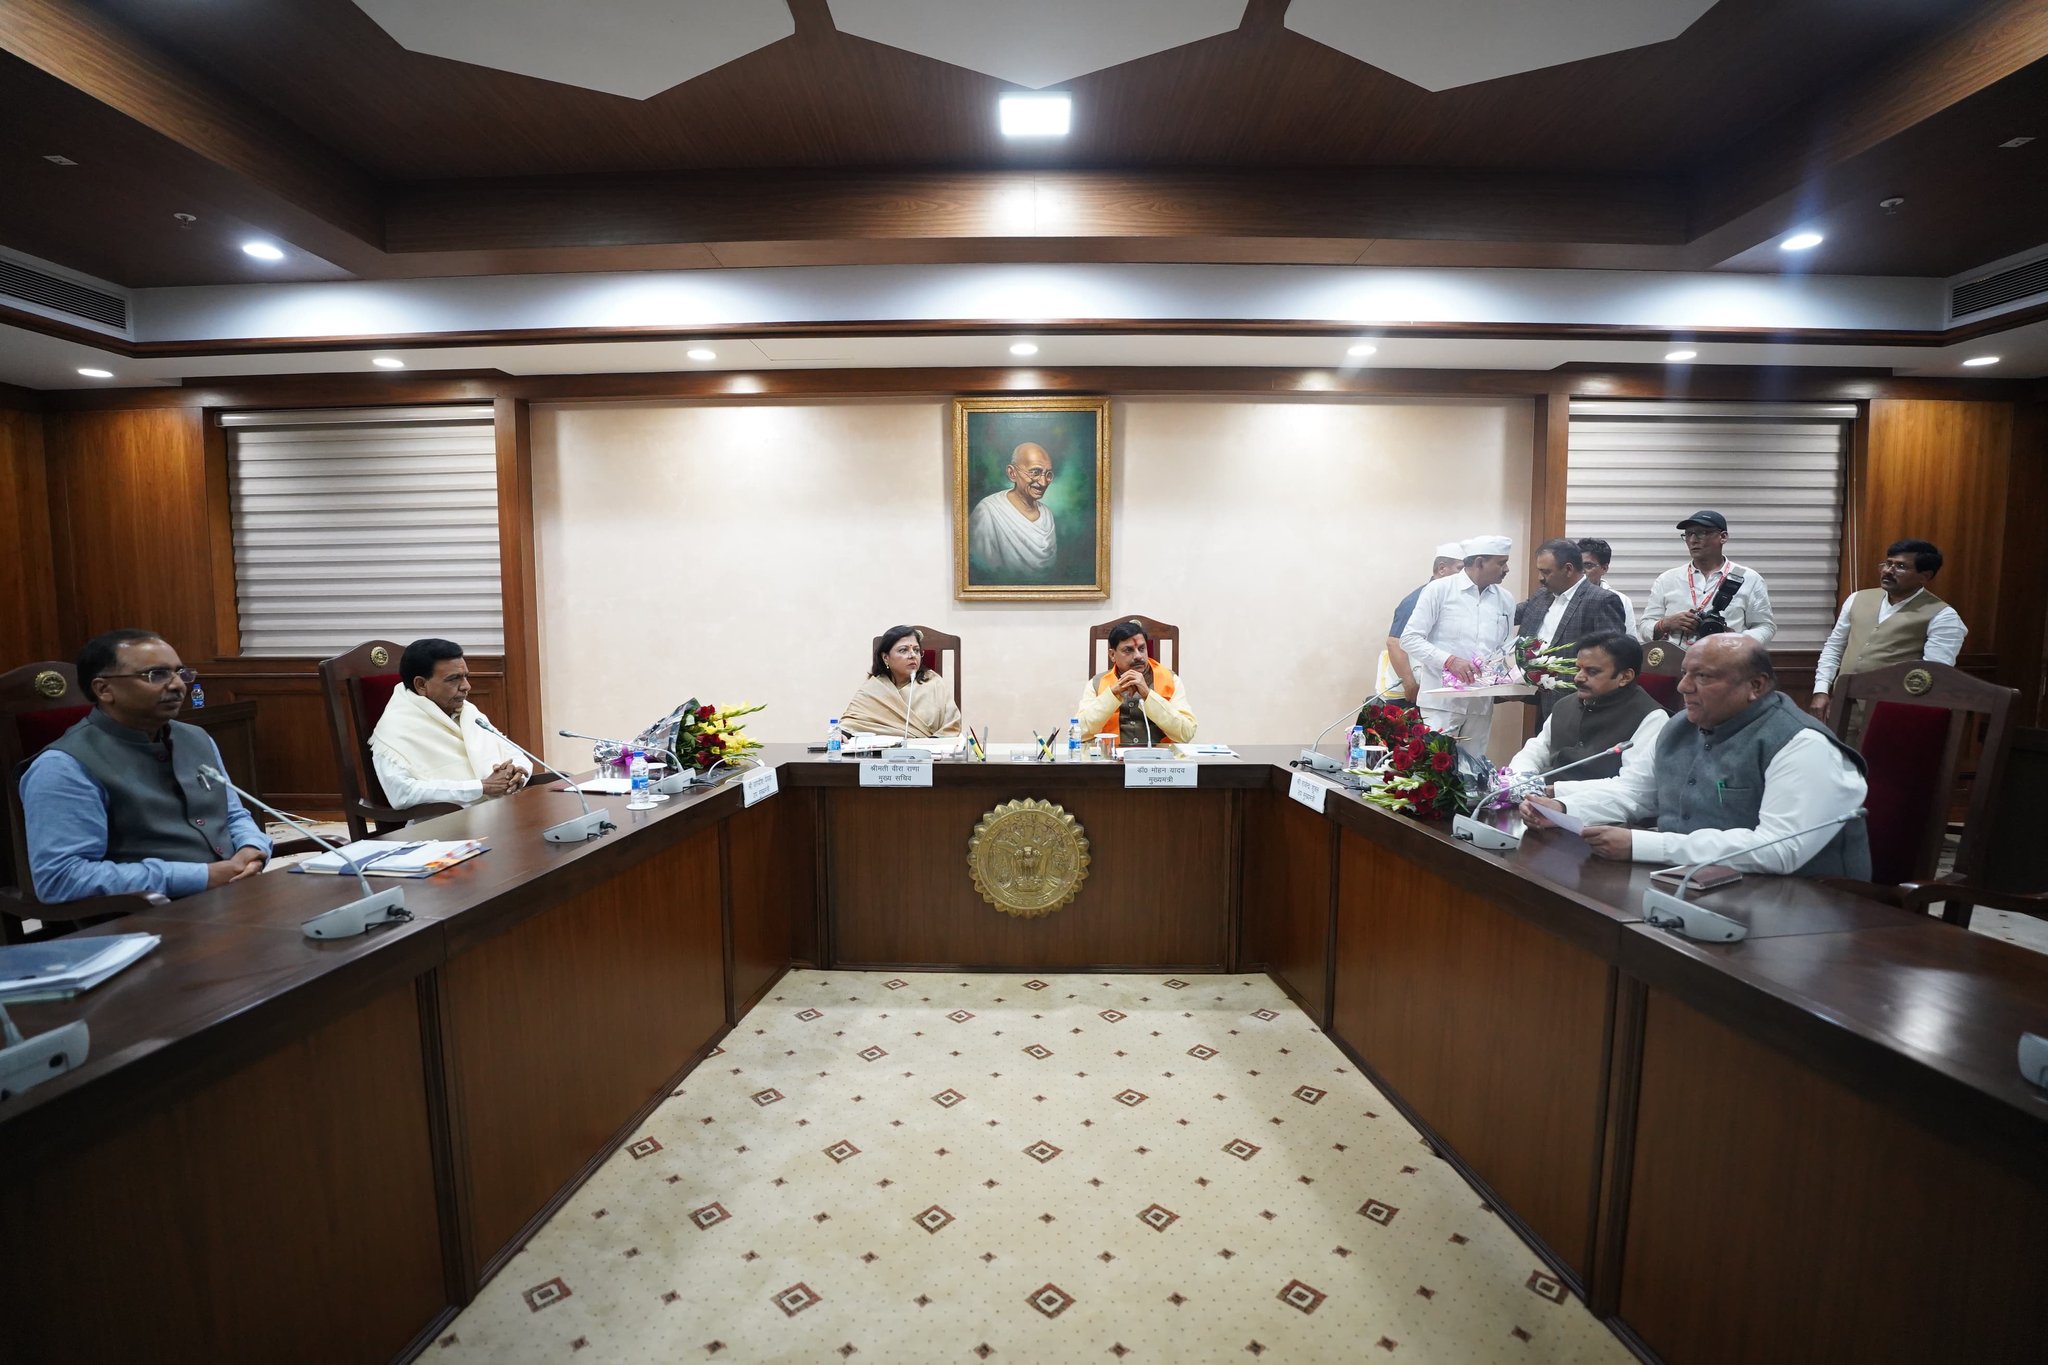 MP Cabinet Decision's: Decisions of the Council of Ministers under the chairmanship of Chief Minister Dr. Yadav